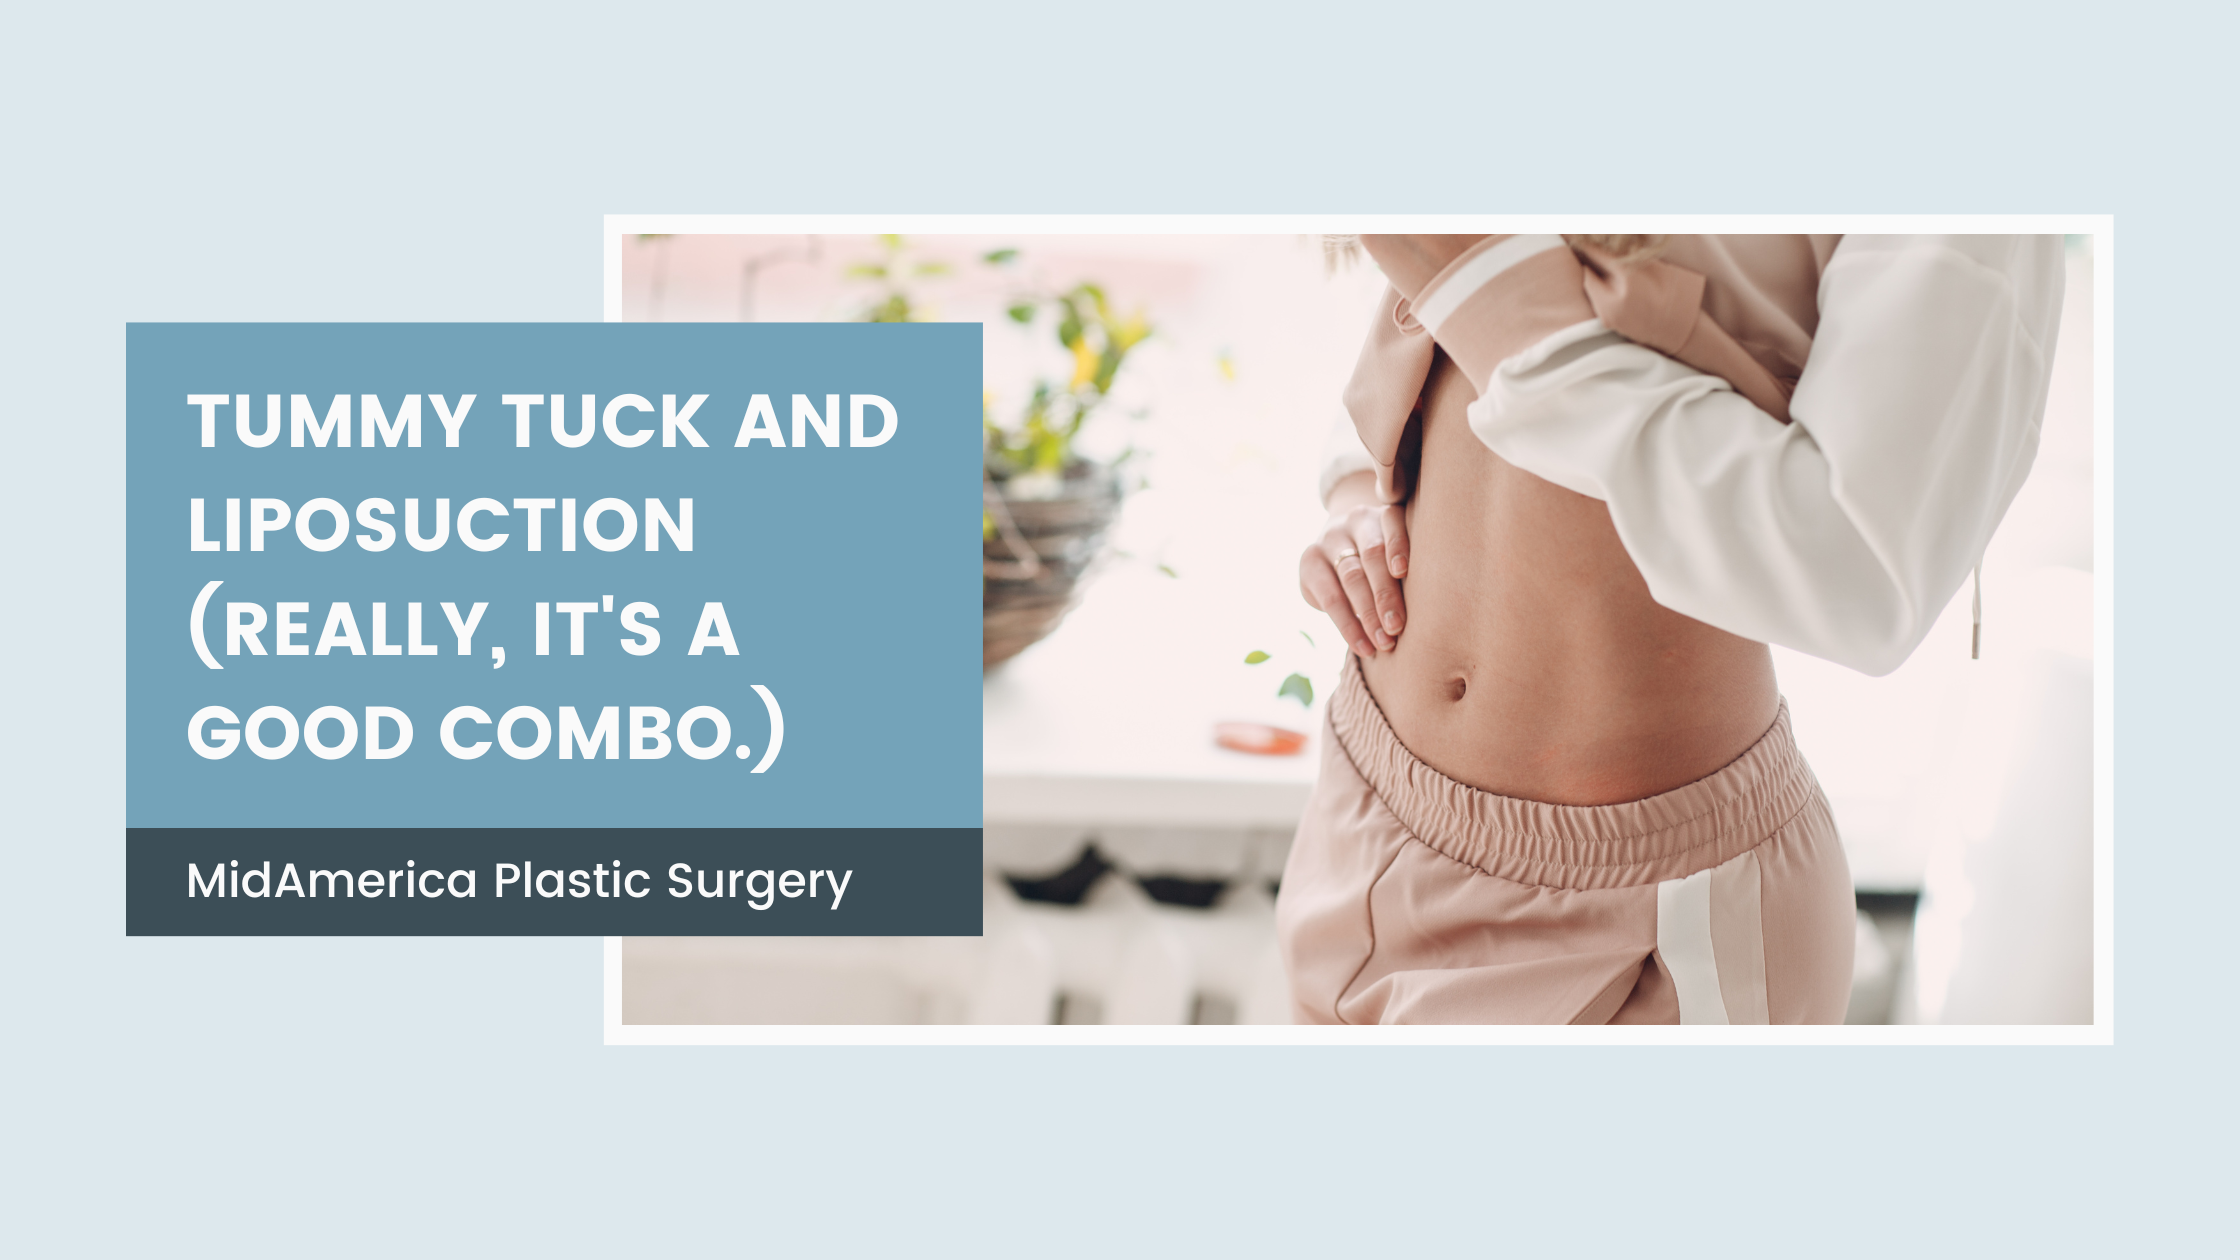 Tummy Tuck and Liposuction (Really, It's A Good Combo)